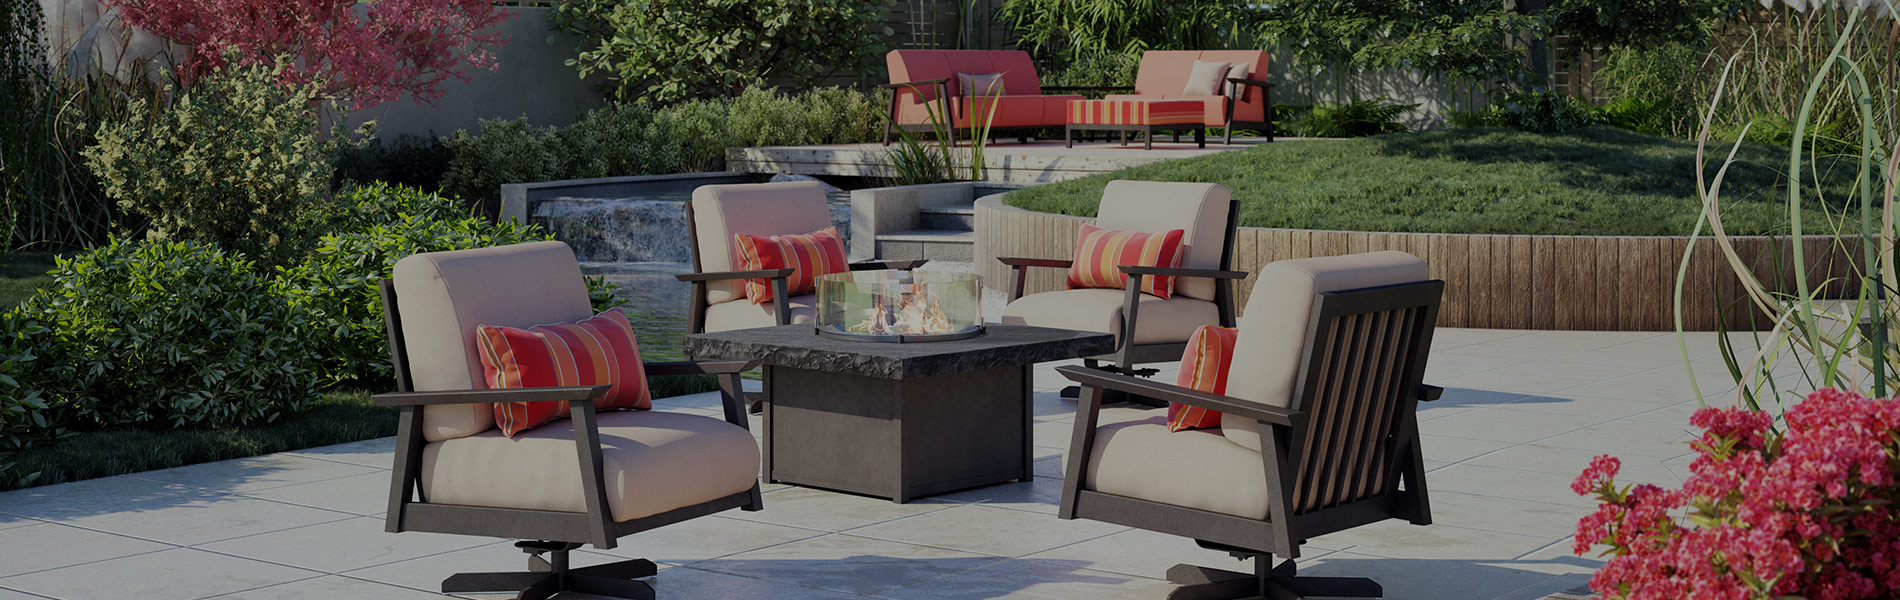 Improving Your Backyard with New Garden Furniture from Emerald Pool & Patio